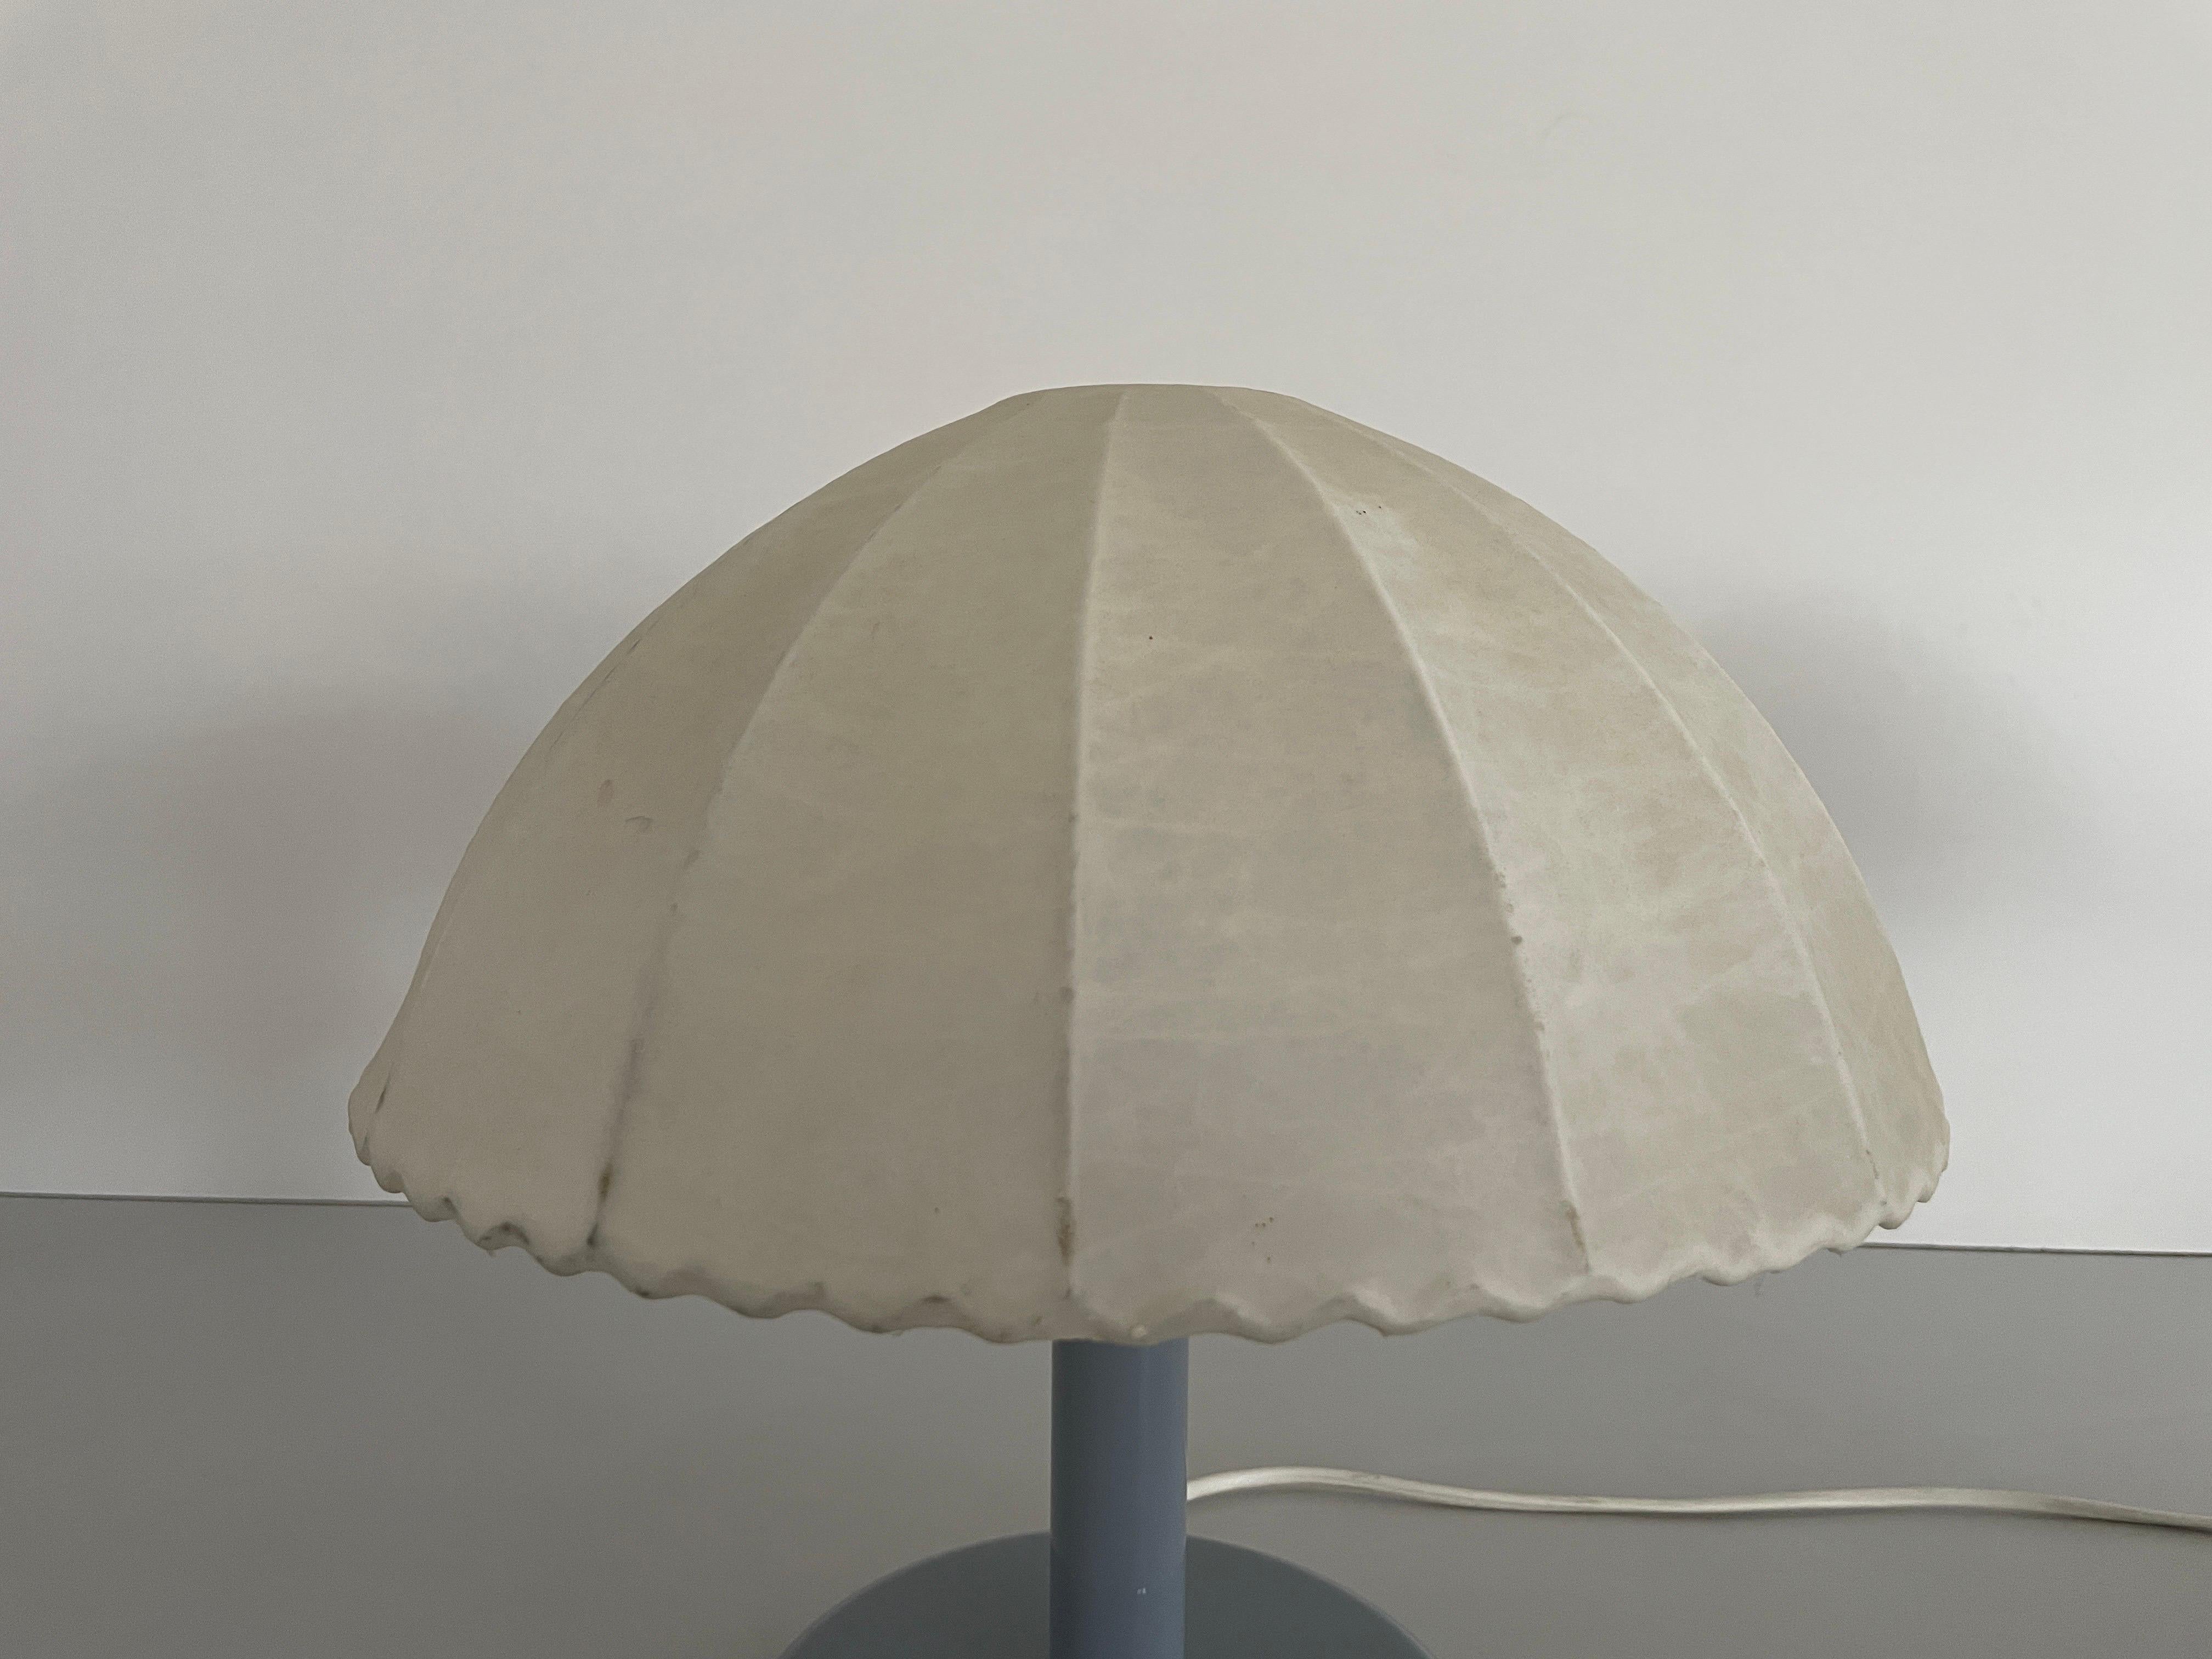 Pair of Cocoon Table Lamps with Grey Metal Base by GOLDKANT, 1960s, Germany For Sale 1